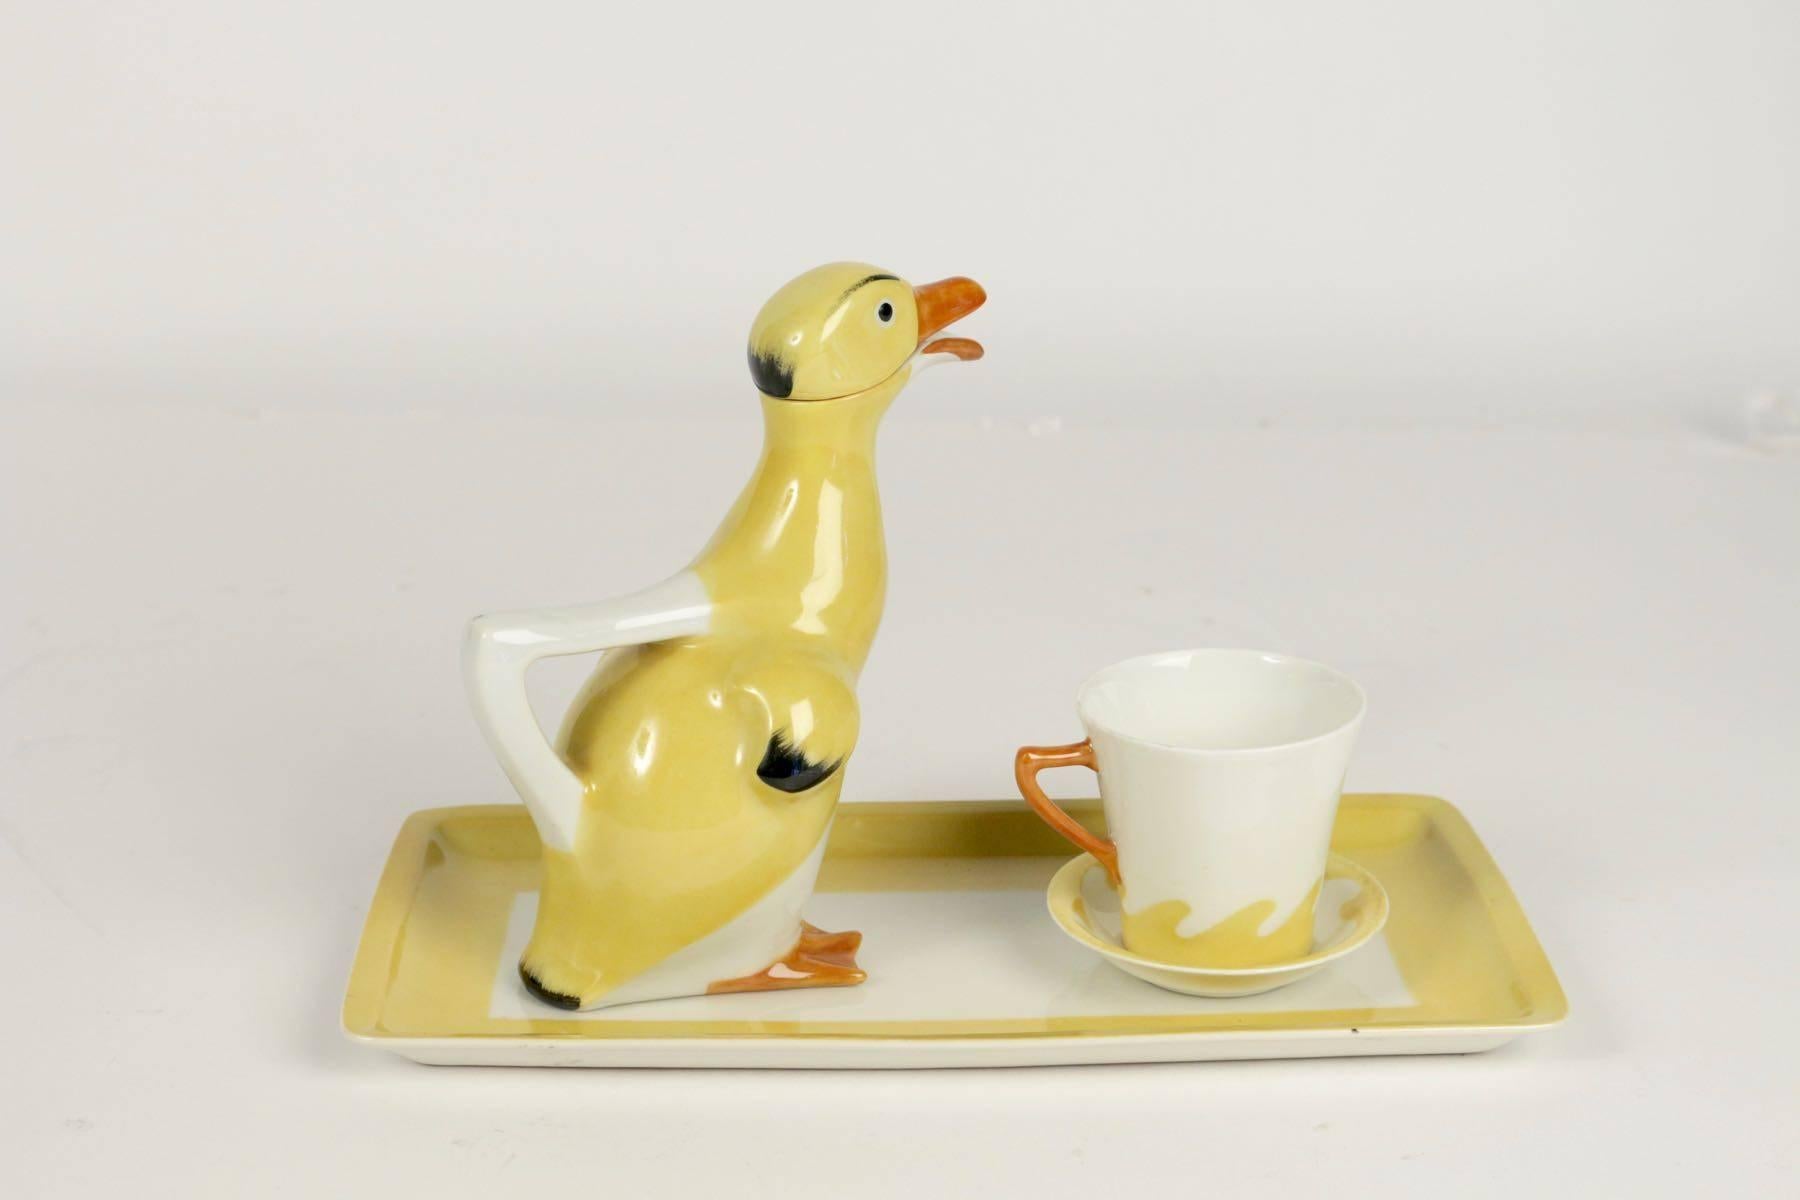 French Duck Service by Sandoz from the Beginning of the 20th Century